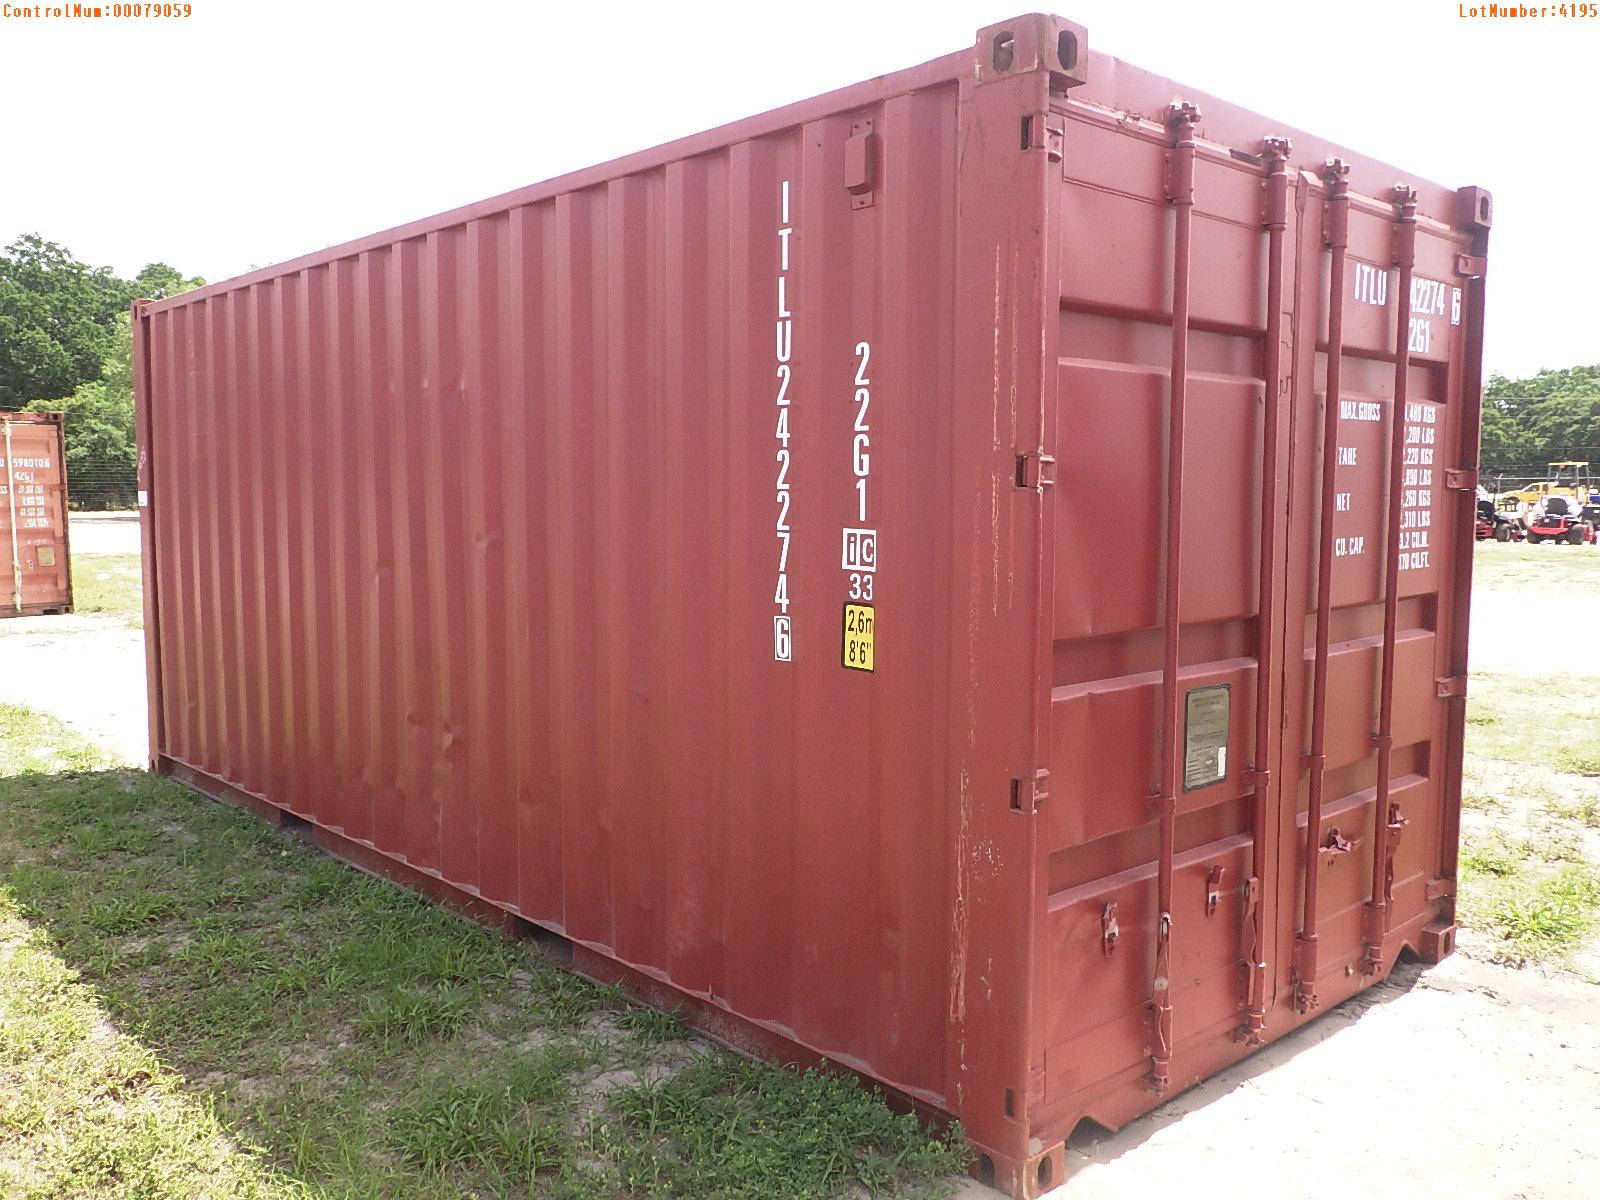 4-04195 (Equip.-Container)  Seller:Private/Dealer 20 FOOT METAL SHIPPING CONTAIN